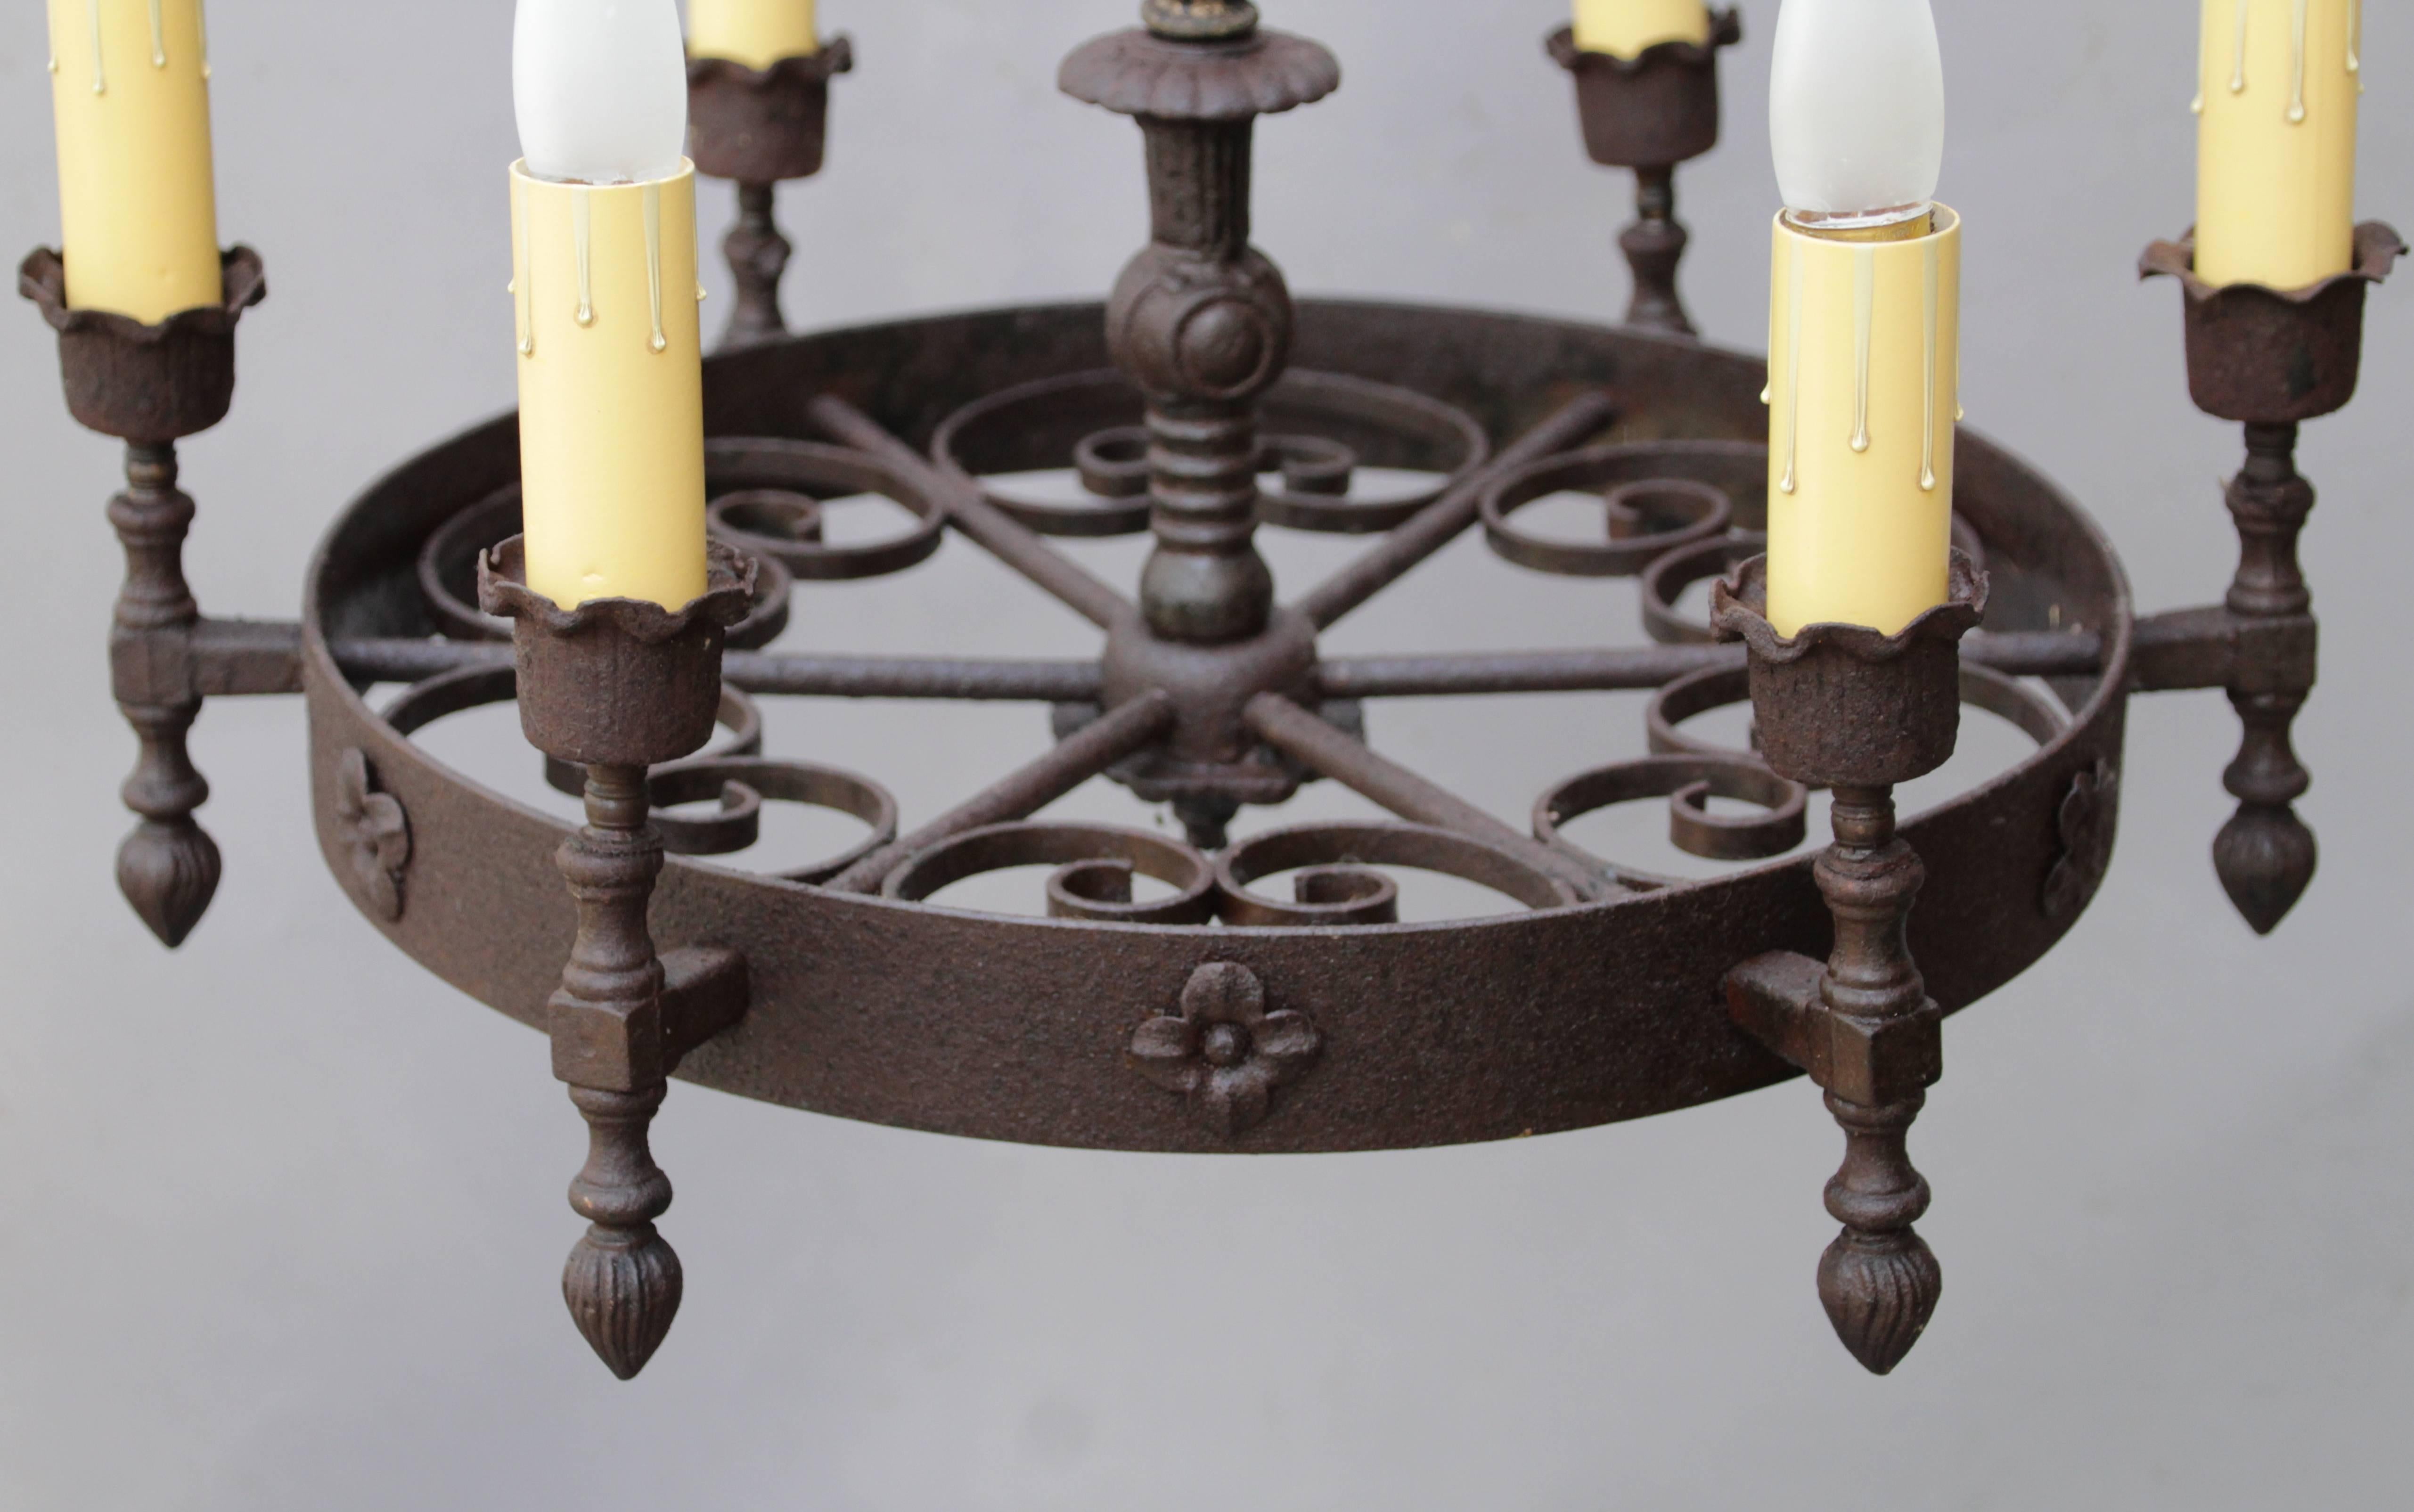 circa 1920s. Classic six-light Spanish Revival chandelier with great visual elements.